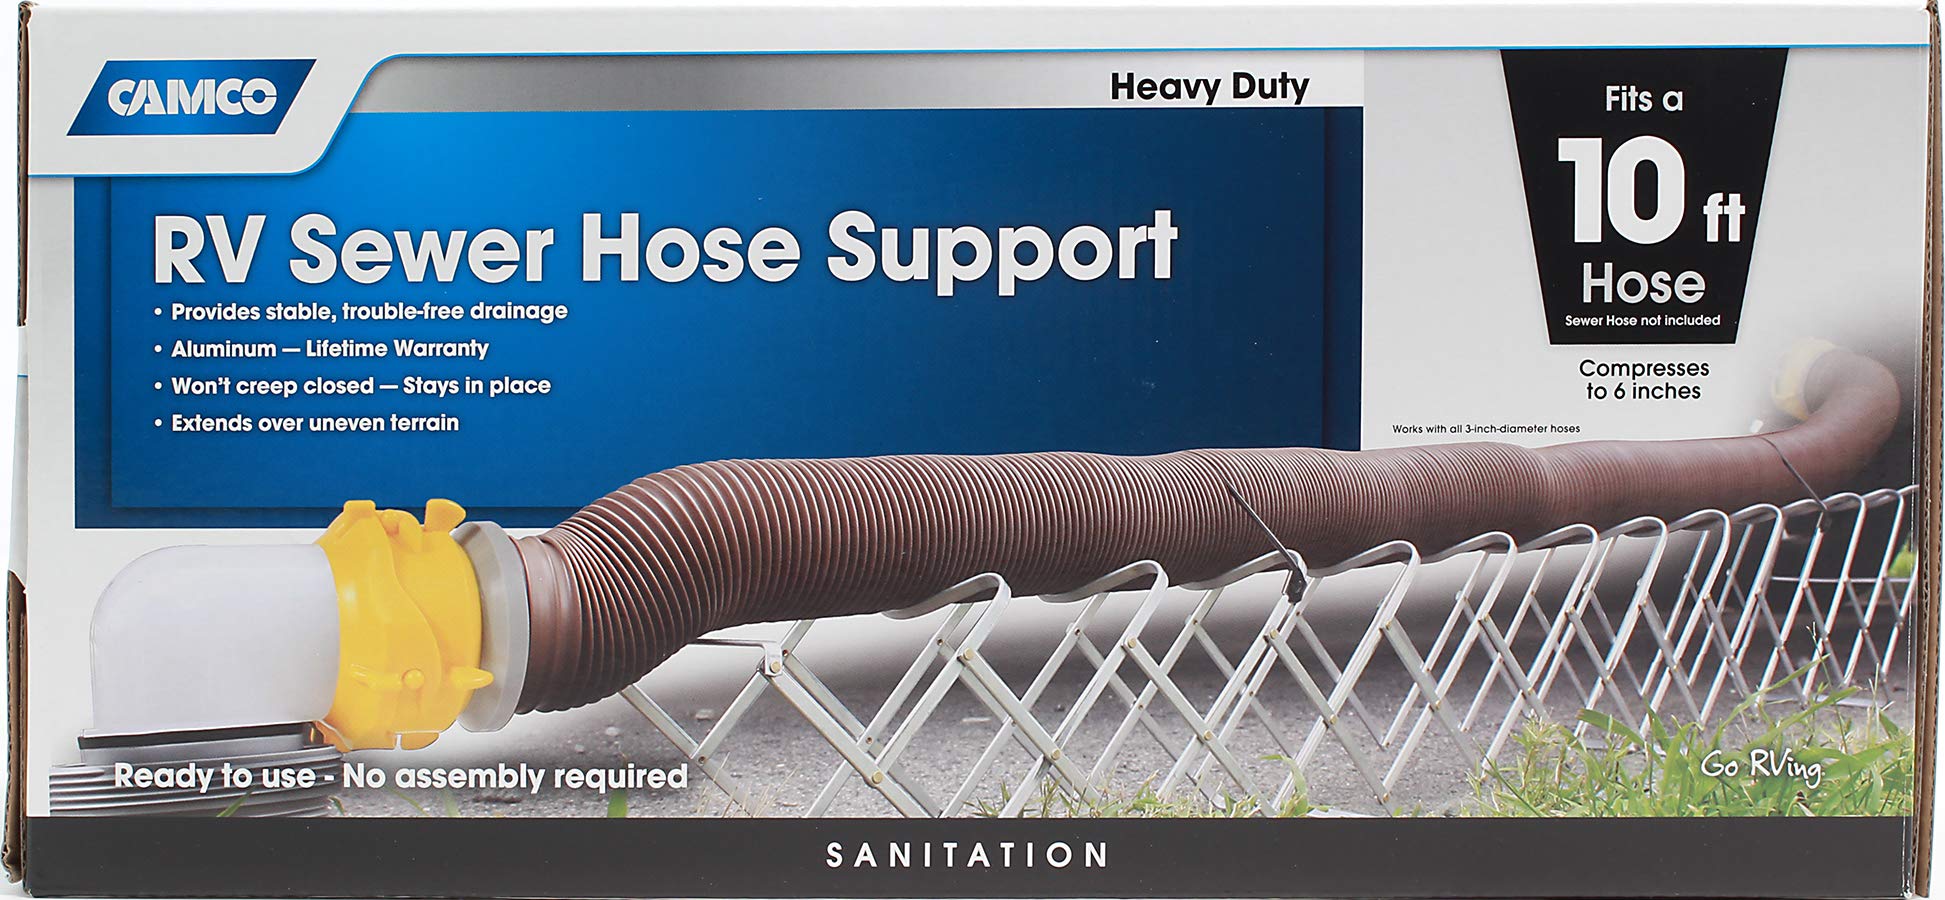 Camco Aluminum Sewer Hose Support - Supports Sewer Hoses Up to 10'| Includes Strap Kit to Secure Your Hose in Place |Durable Construction| Lightweight Design - (40351)